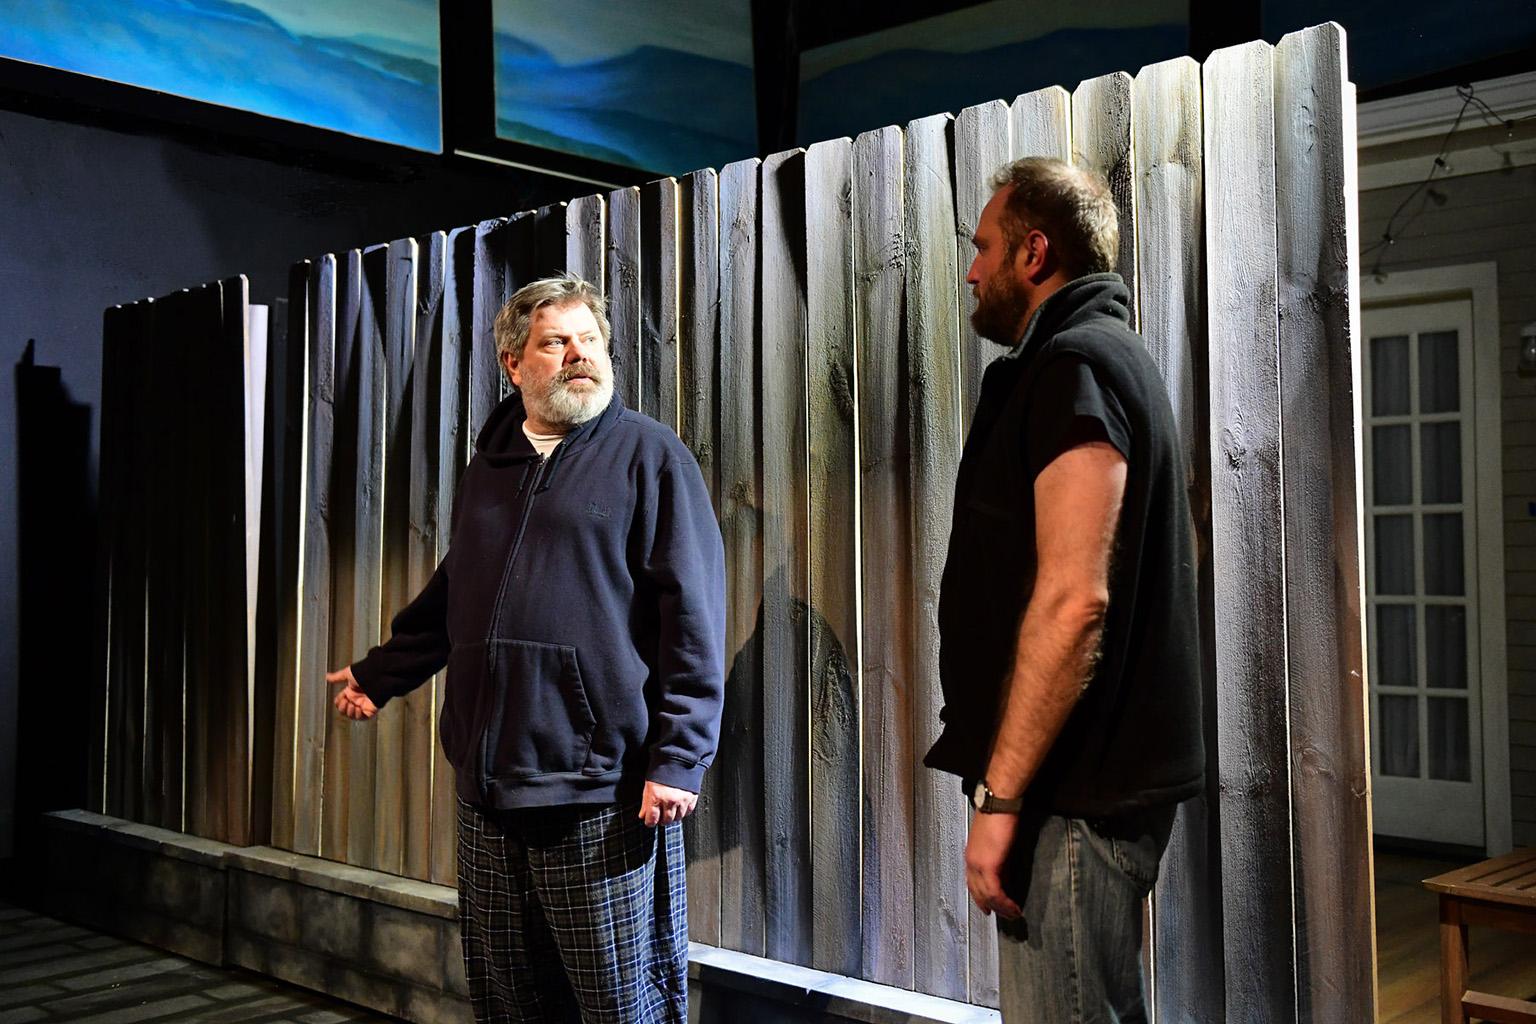 H.B. Ward, left, and Joseph Wiens in “The Realistic Joneses.” (Photo by Evan Hanover)